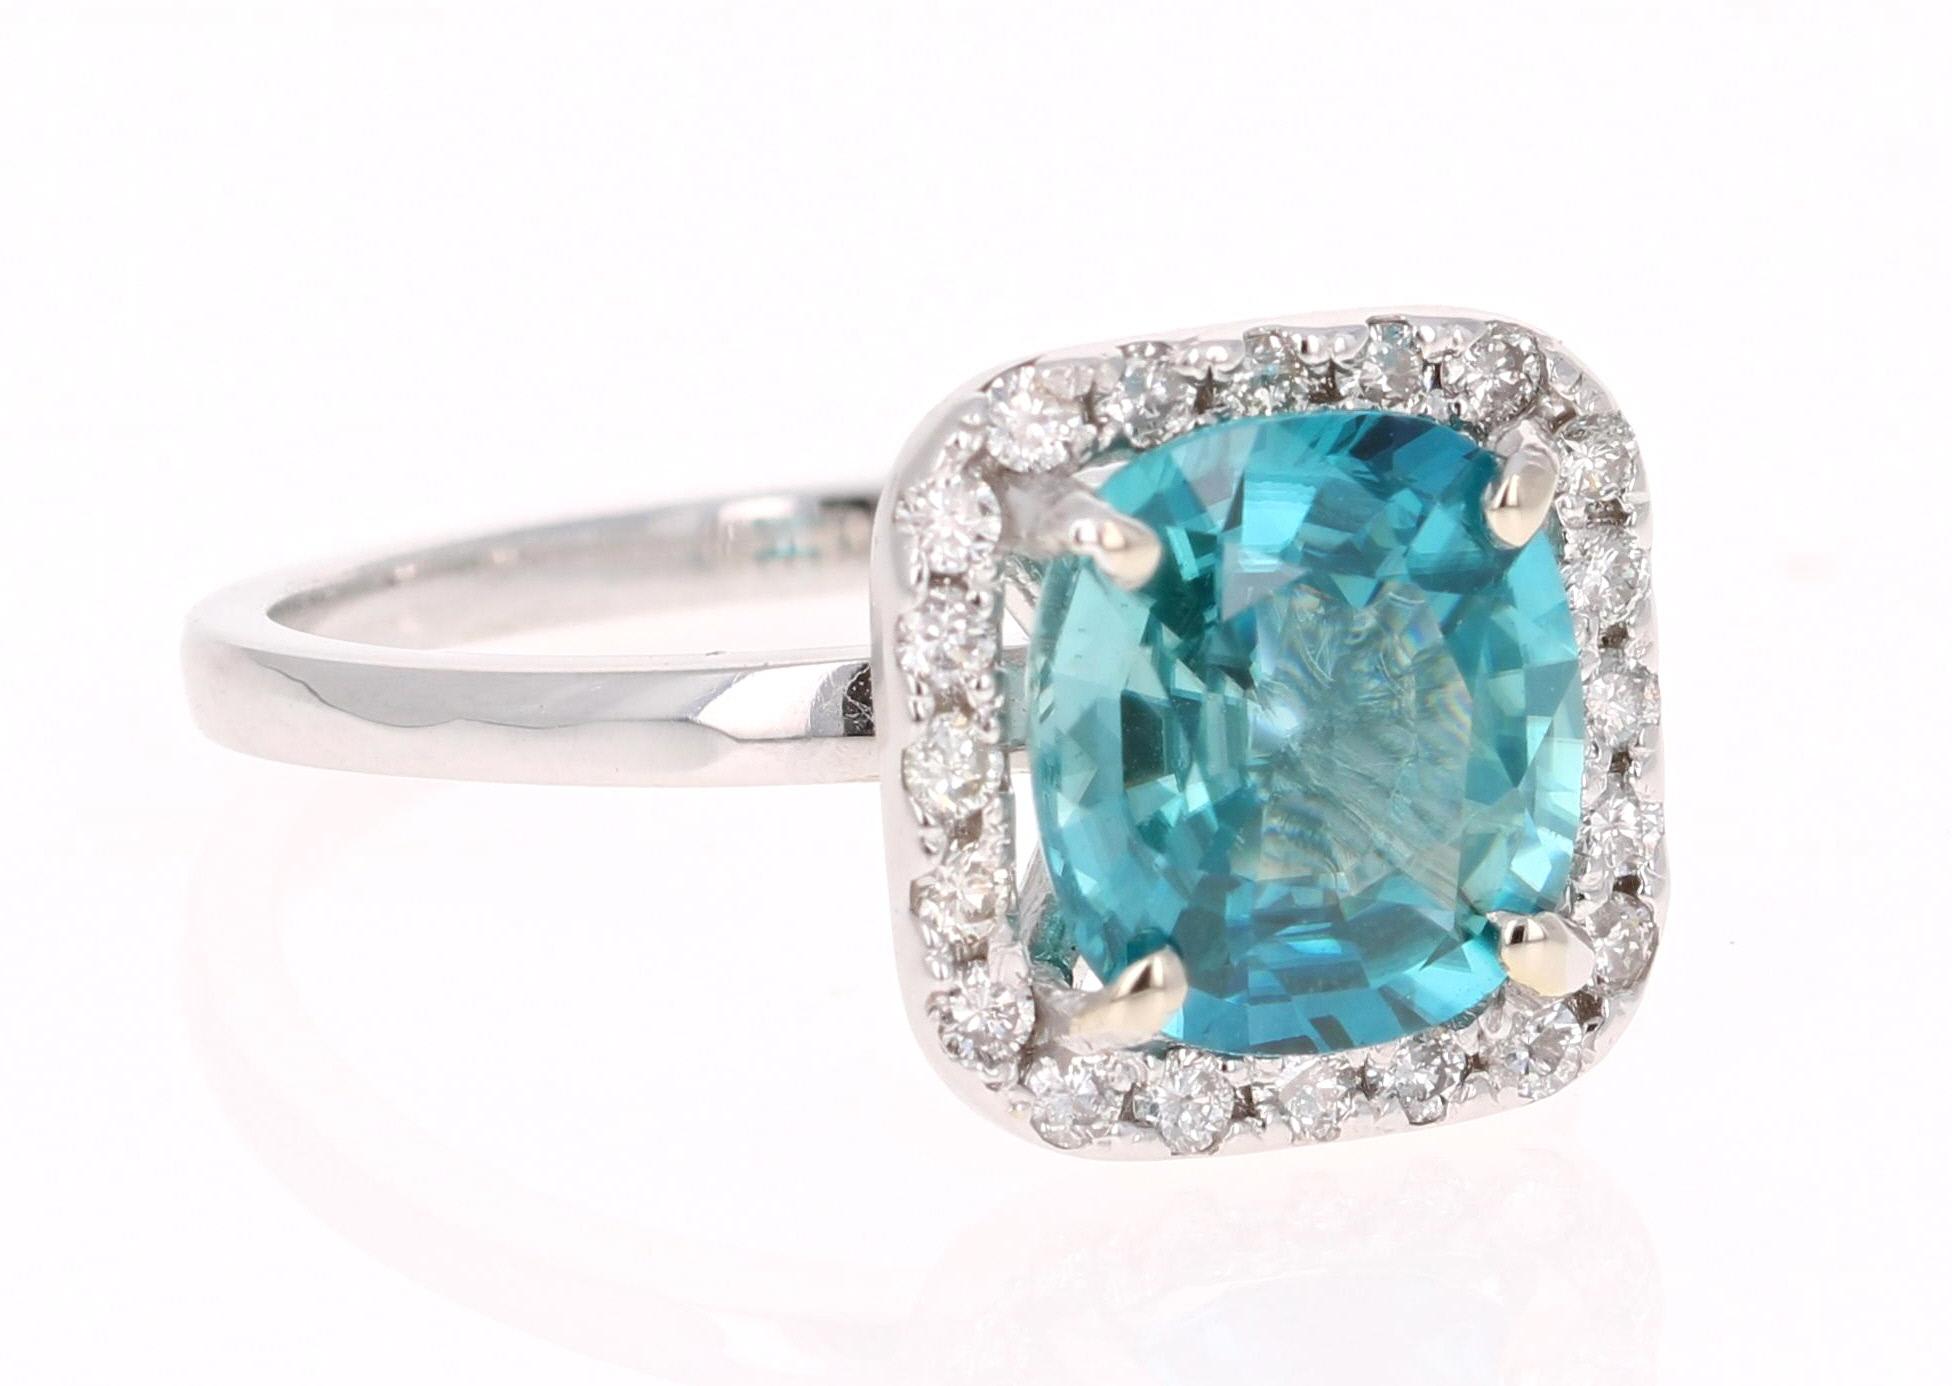 A beautiful Blue Zircon and Diamond ring that can be a nice Engagement ring or just an everyday ring!
Blue Zircon is a natural stone mined mainly in Sri Lanka, Myanmar, and Australia.  
This ring has a Cushion Cut Blue Zircon that weighs 3.29 carats